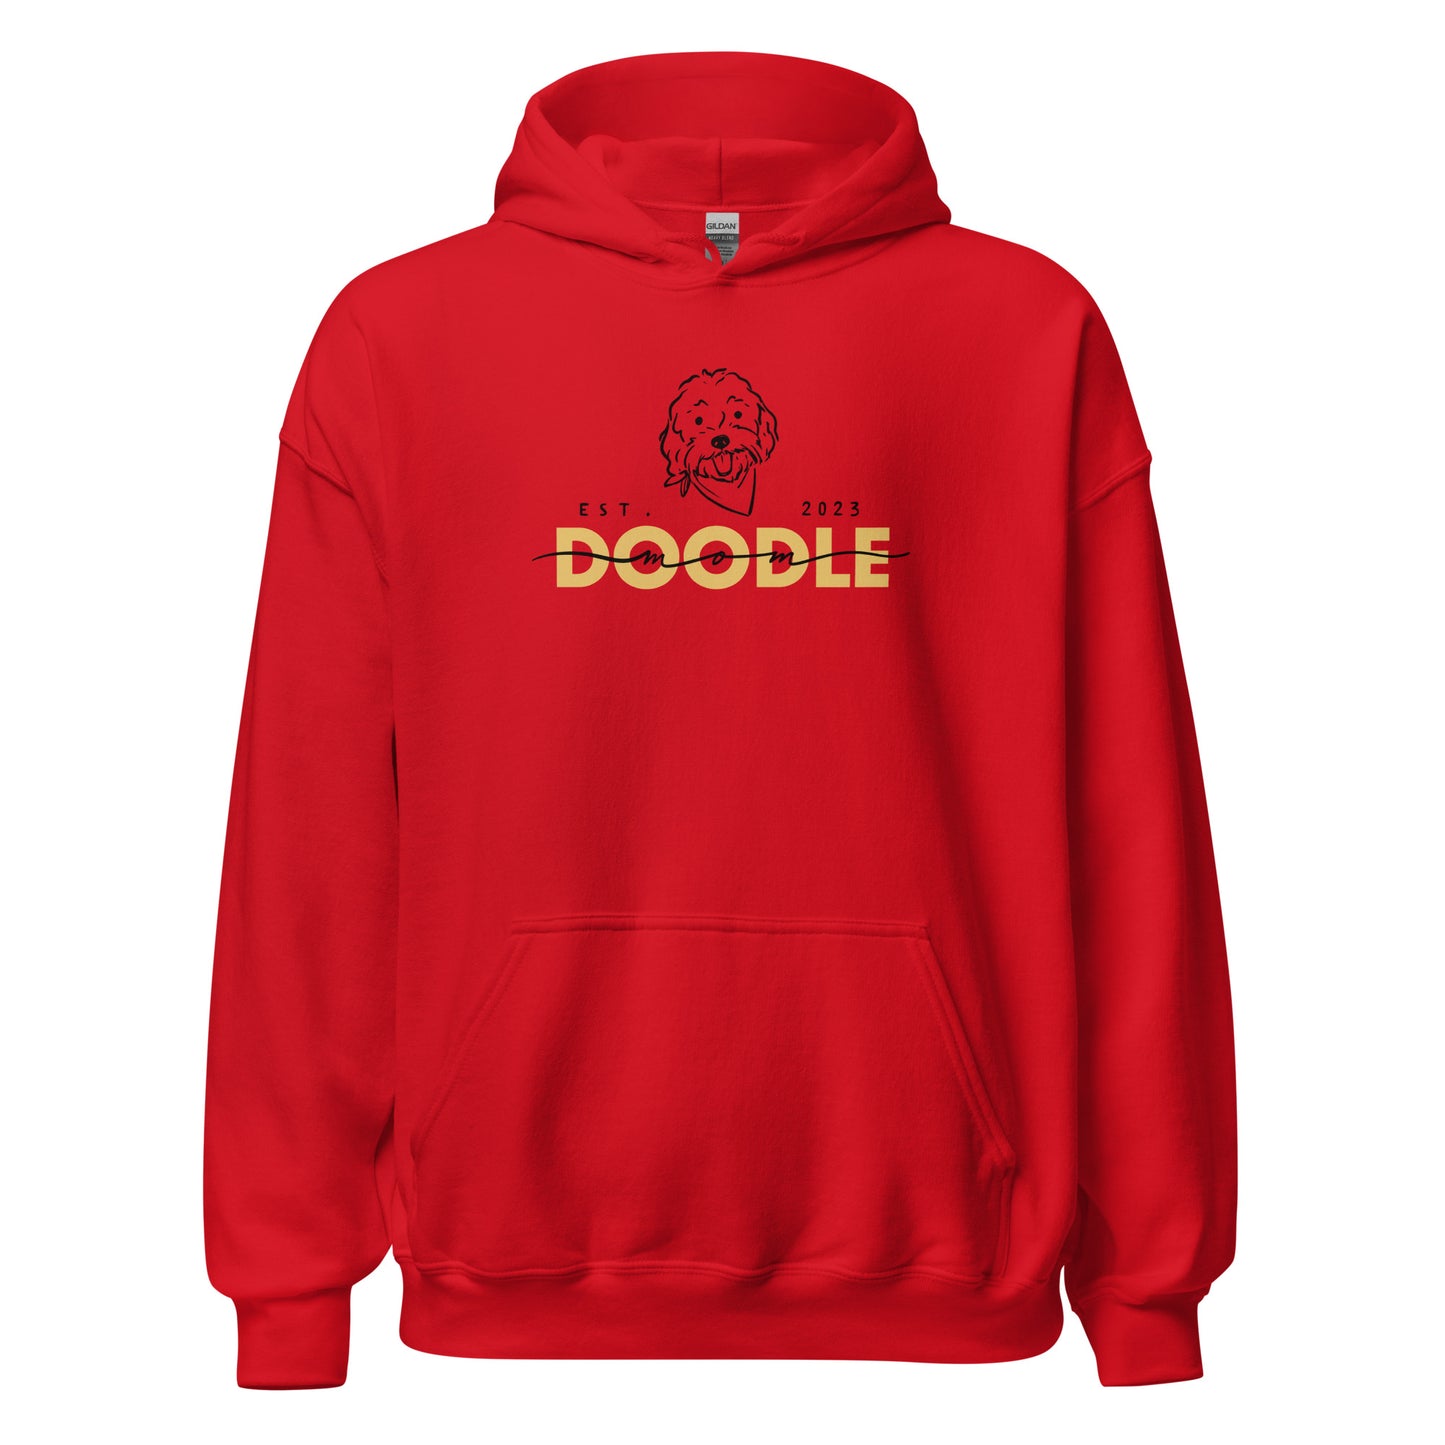 Goldendoodle Mom Hoodie with Goldendoodle face and words "Doodle Mom Est 2023" in red color